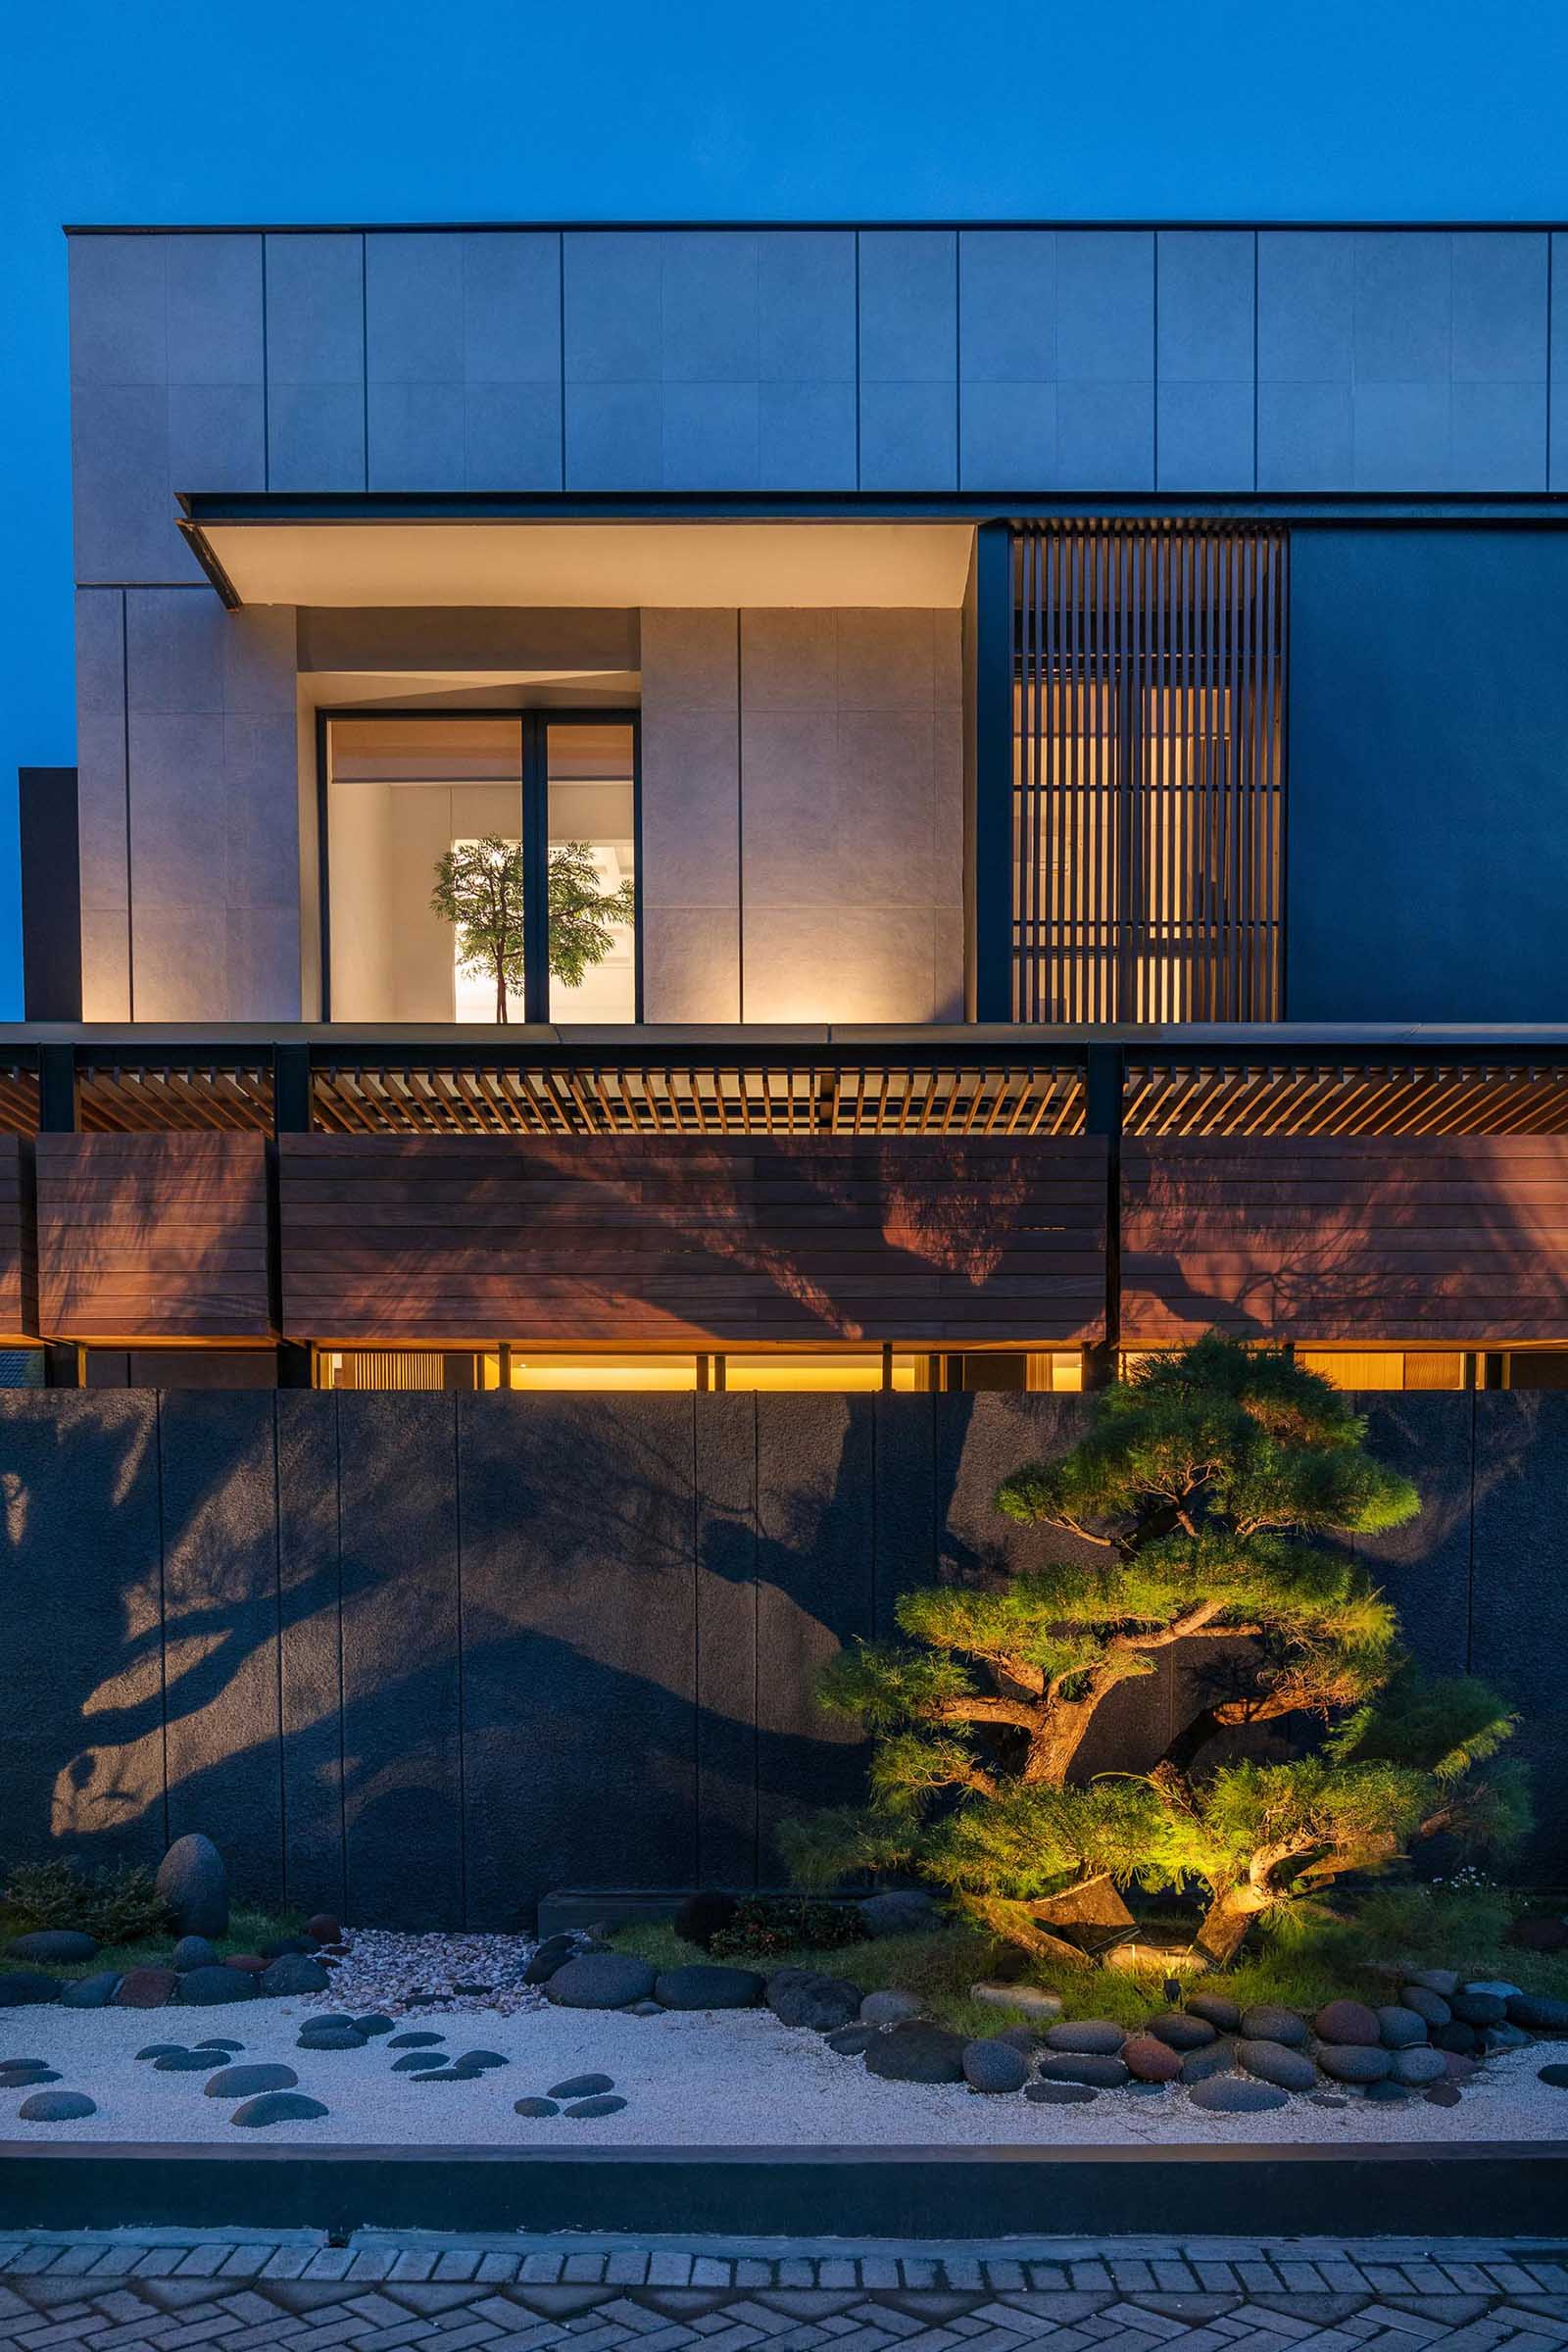 Lighting has been installed within this modern Zen garden, which allows the plants to be showcased at night, casting shadows onto the fence, and adding extra light to the neighborhood.